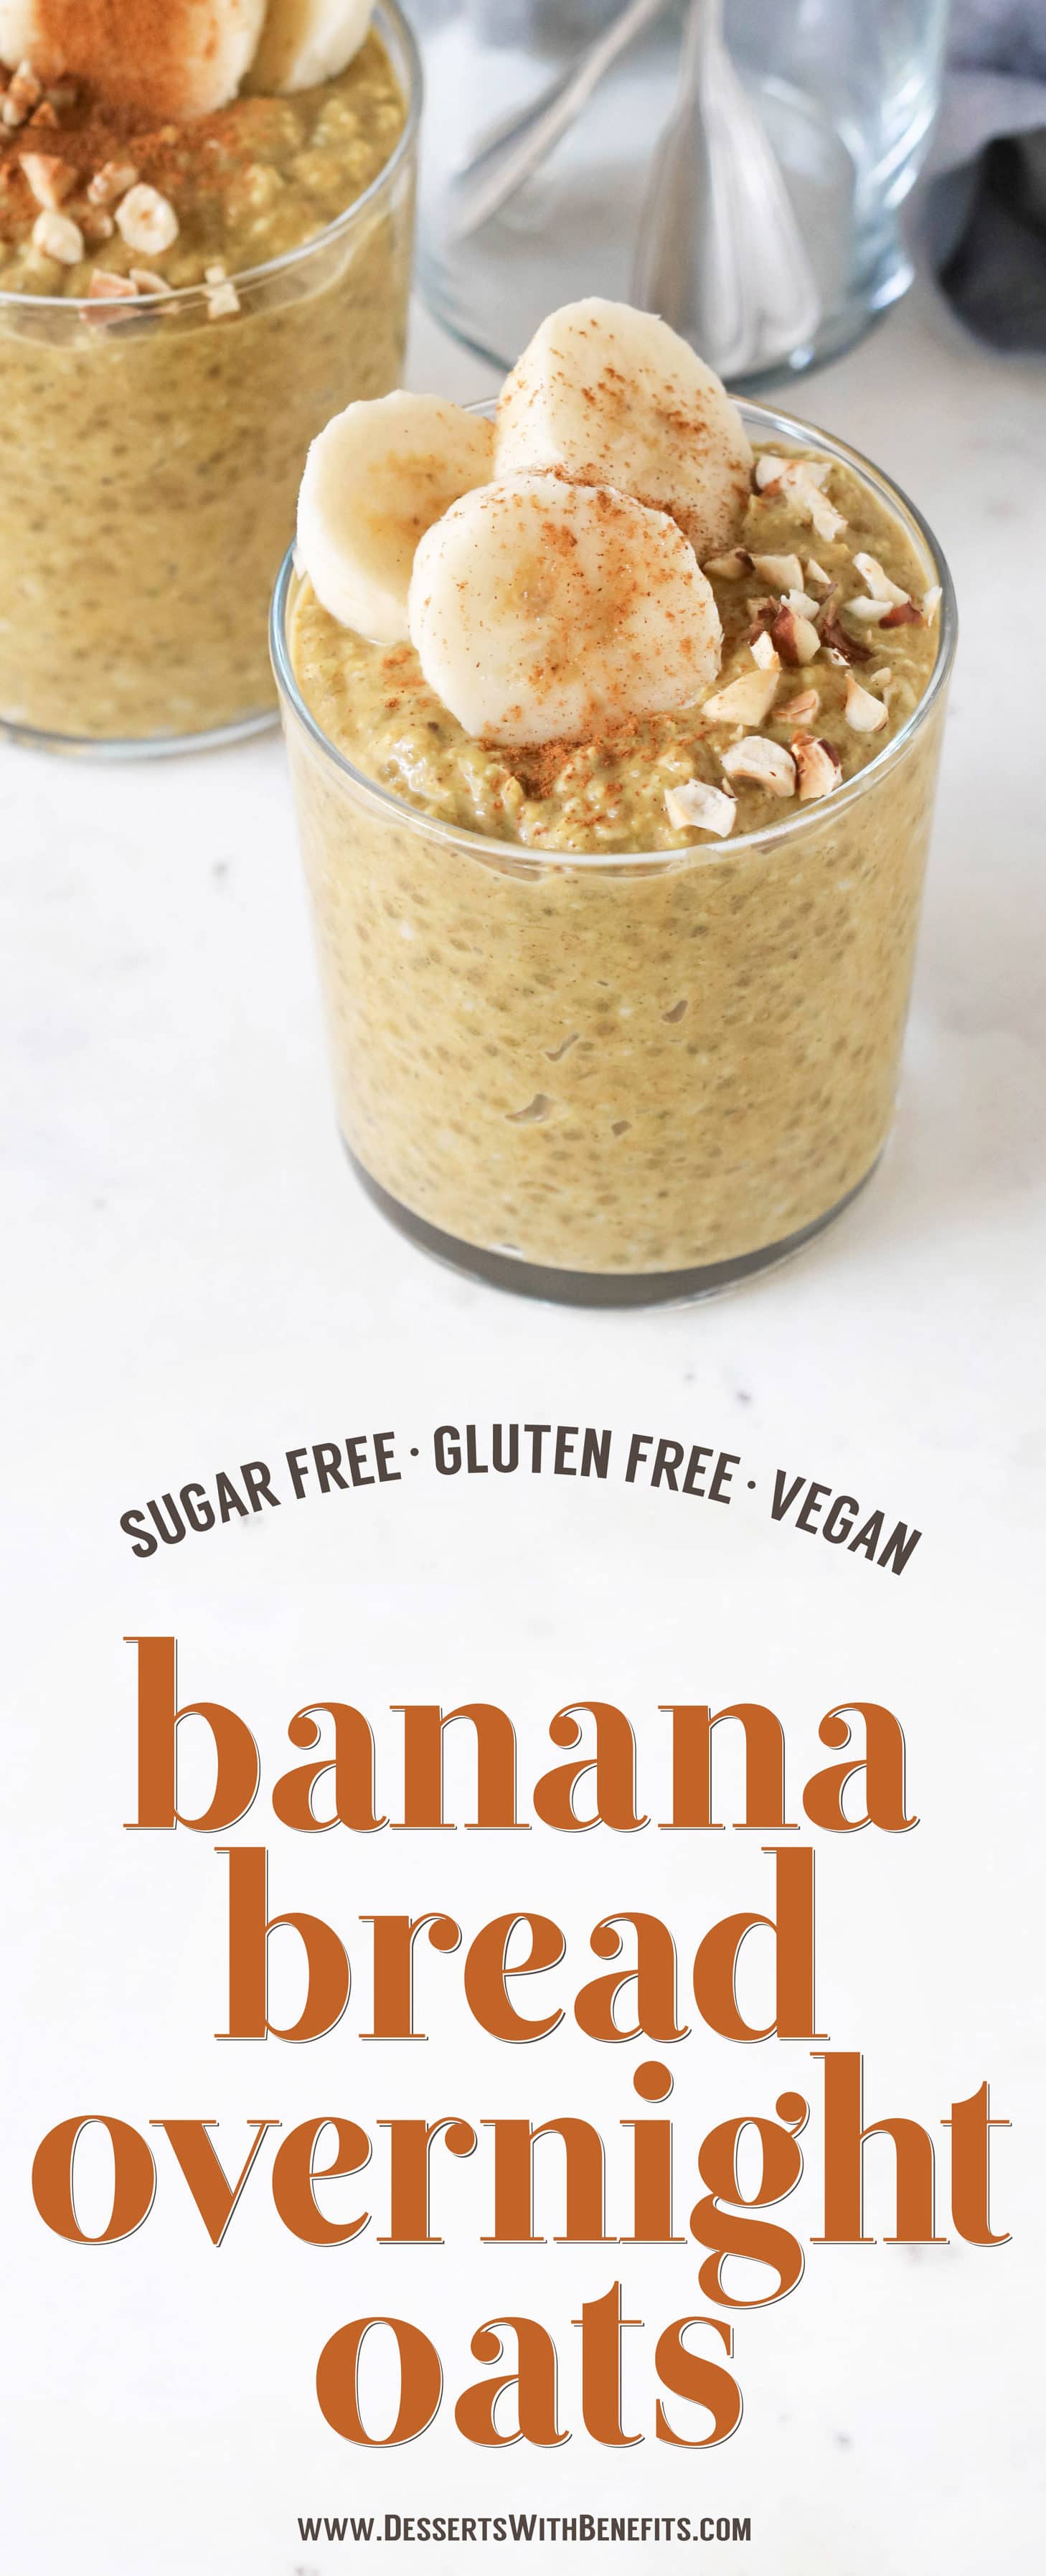 These Healthy Banana Bread Overnight Dessert Oats have all the flavor of Banana Bread but in oatmeal form, and without the butter, oil, and white sugar! This banana oatmeal is thick, sweet, and filling, and it's refined sugar free, low fat, high fiber, gluten free, dairy free, and vegan too!